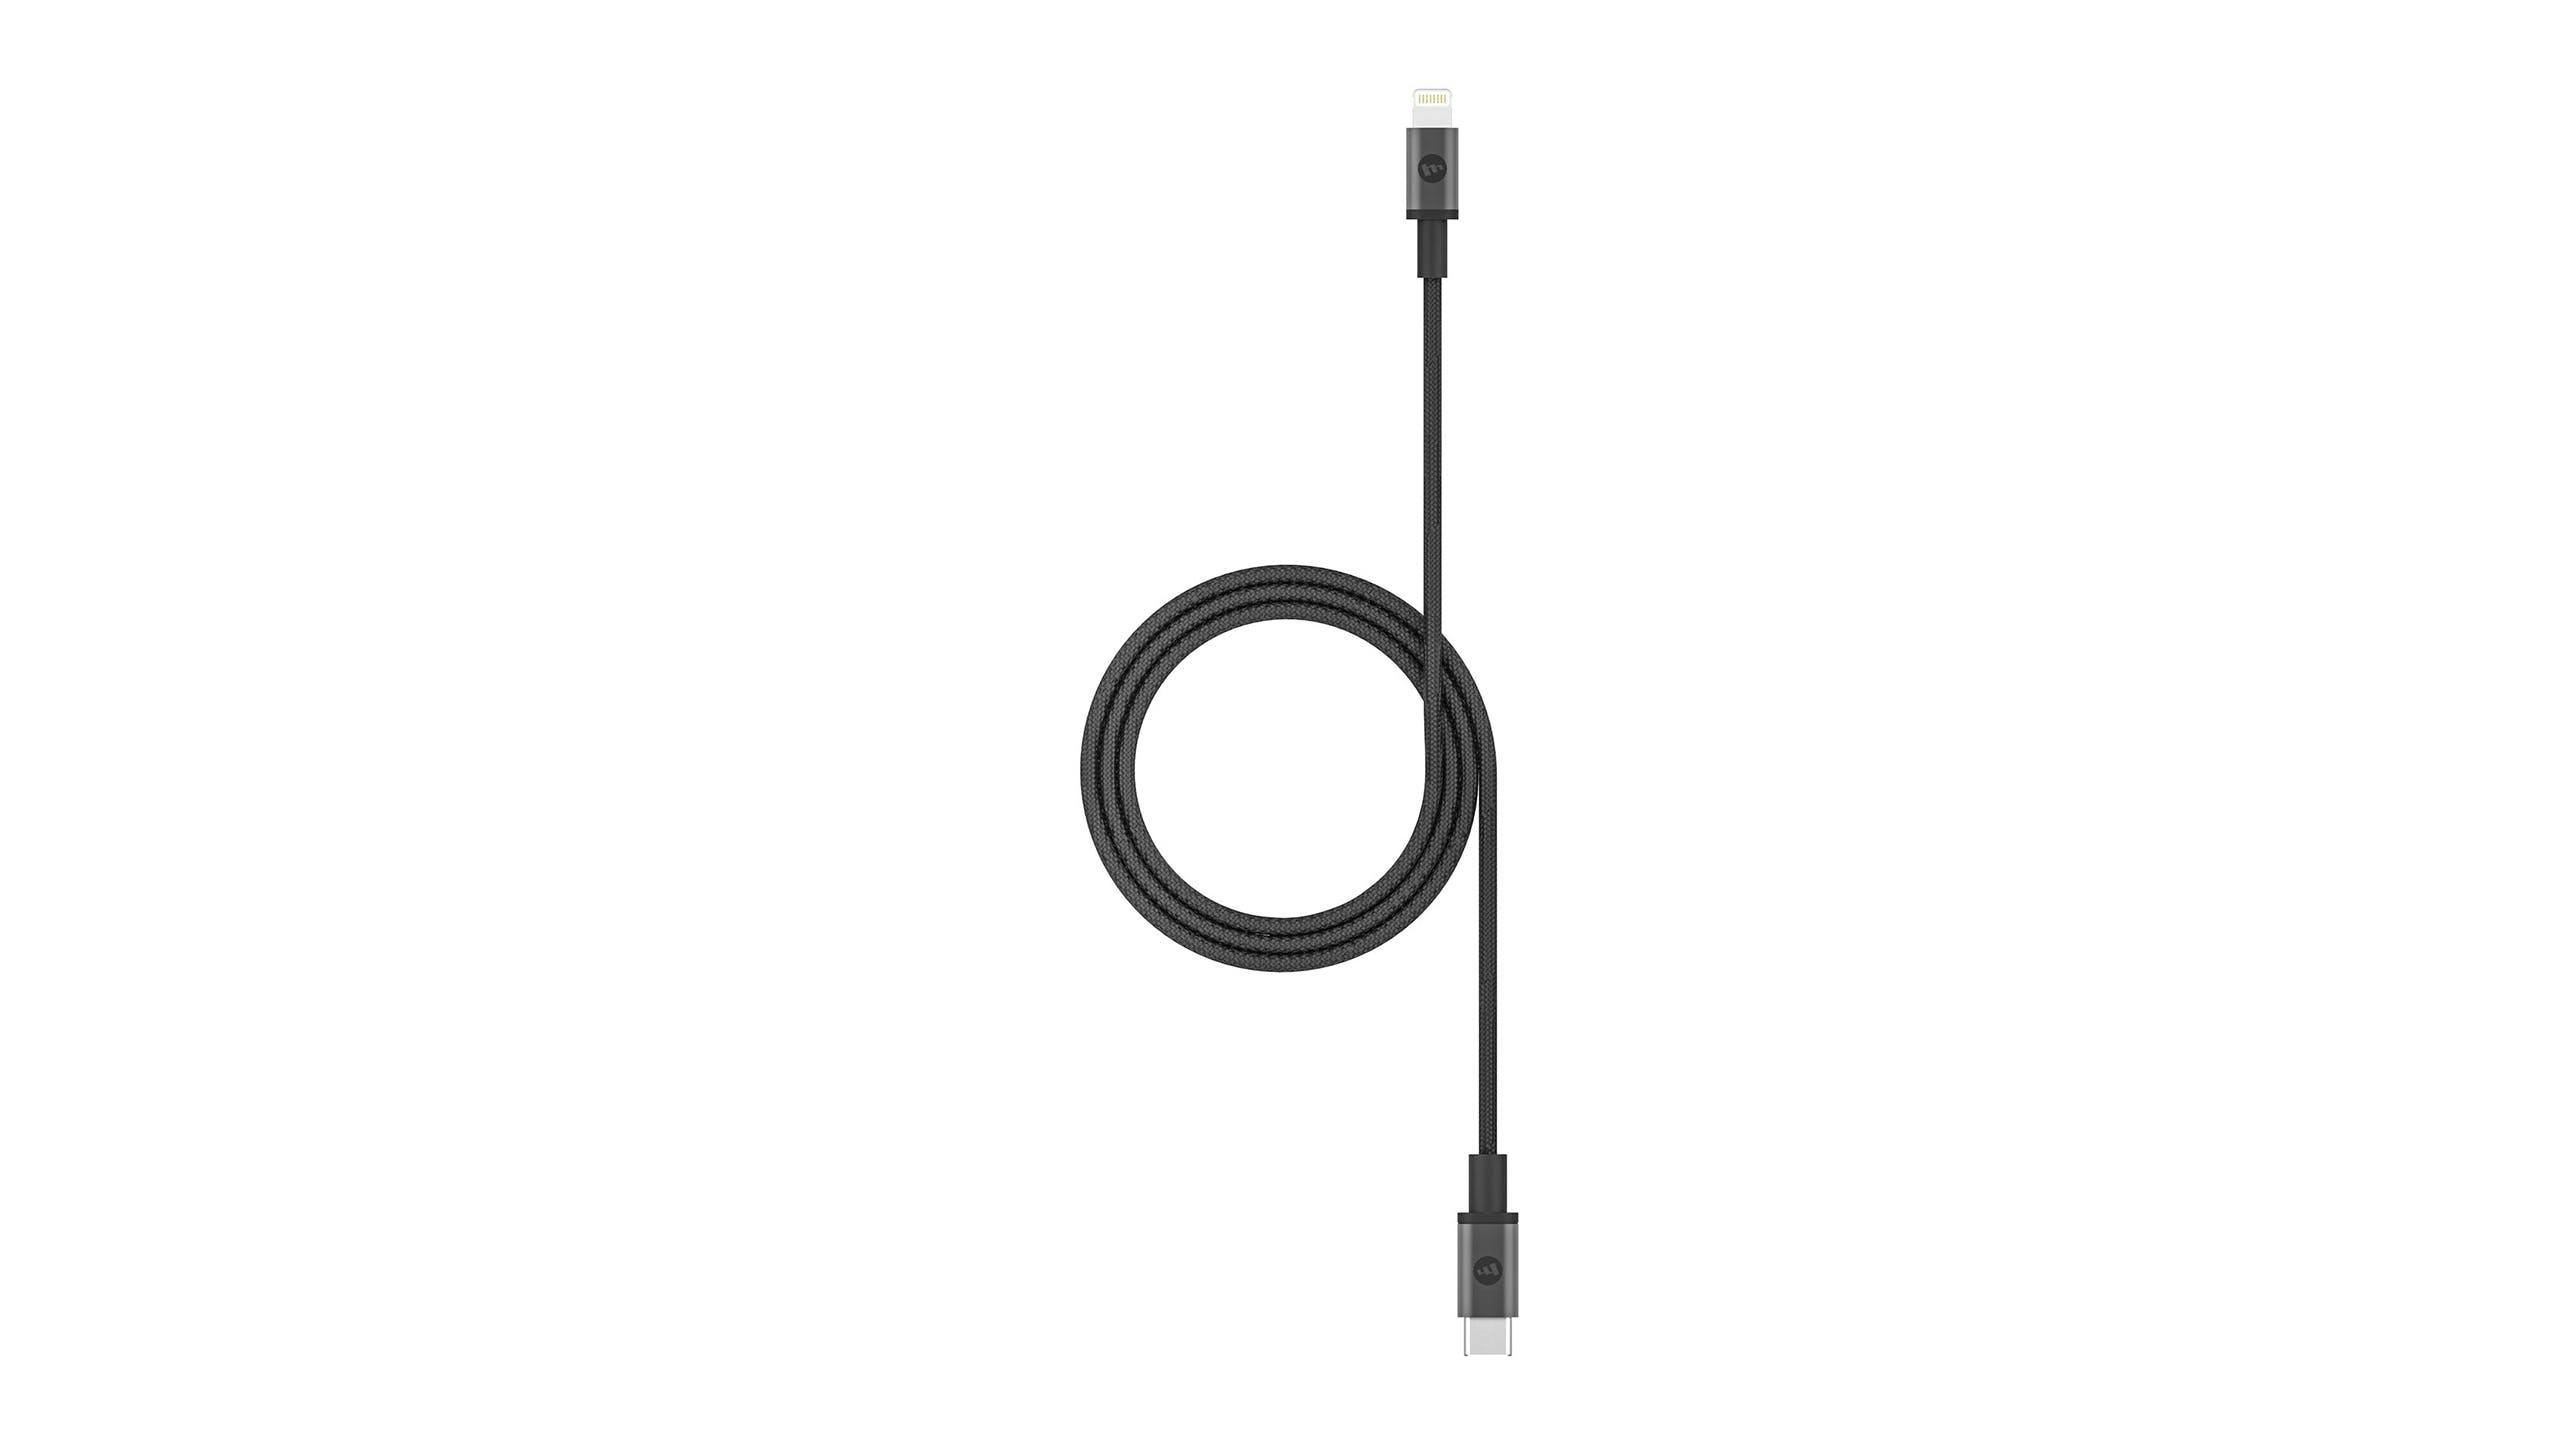 Mophie USB-C Cable with Lightning Connector 1m - Black